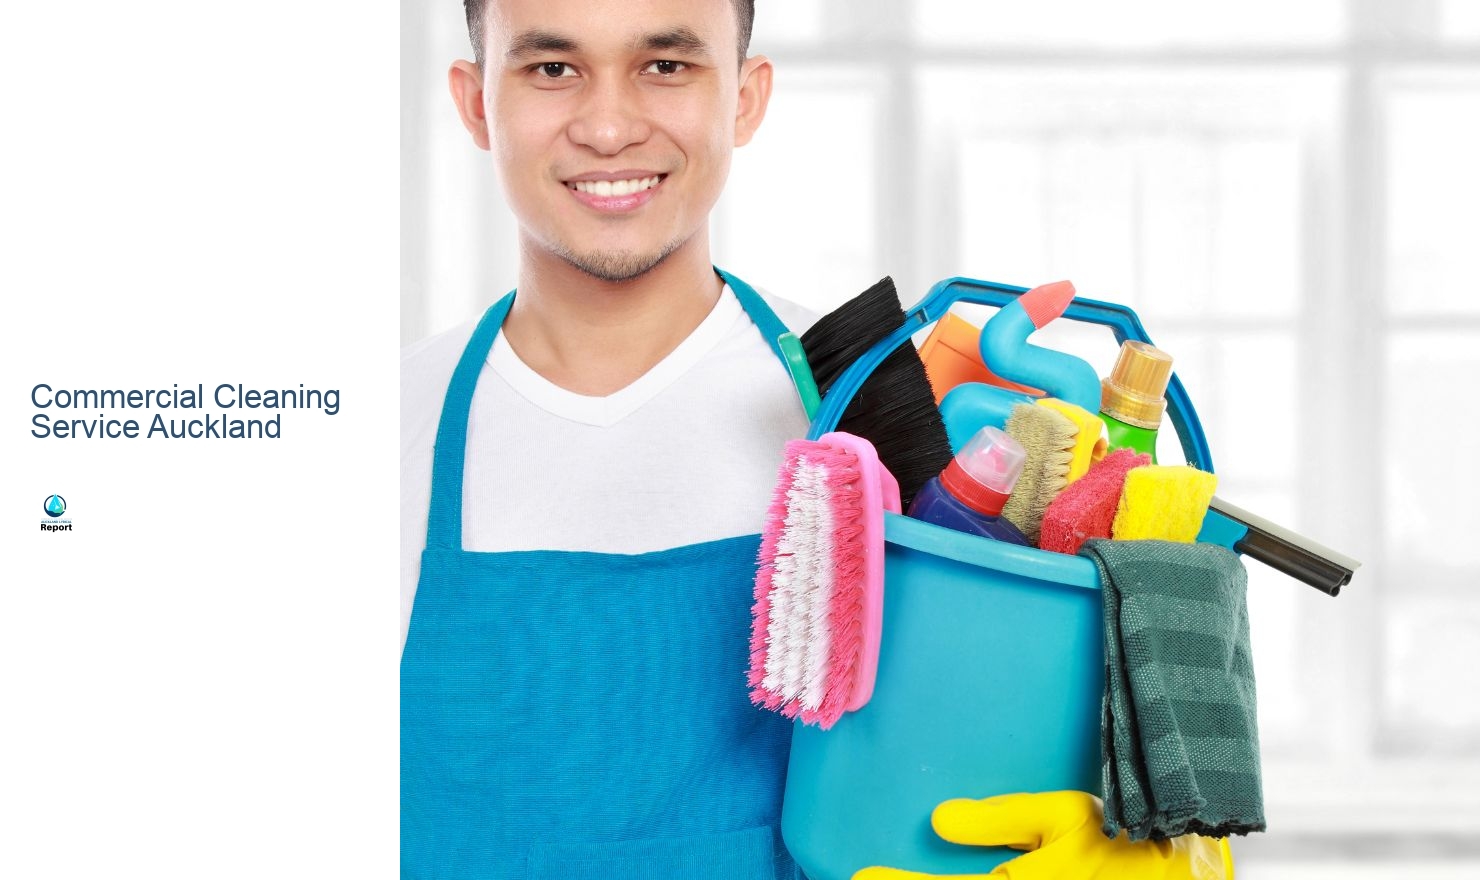 Commercial Cleaning Service Auckland